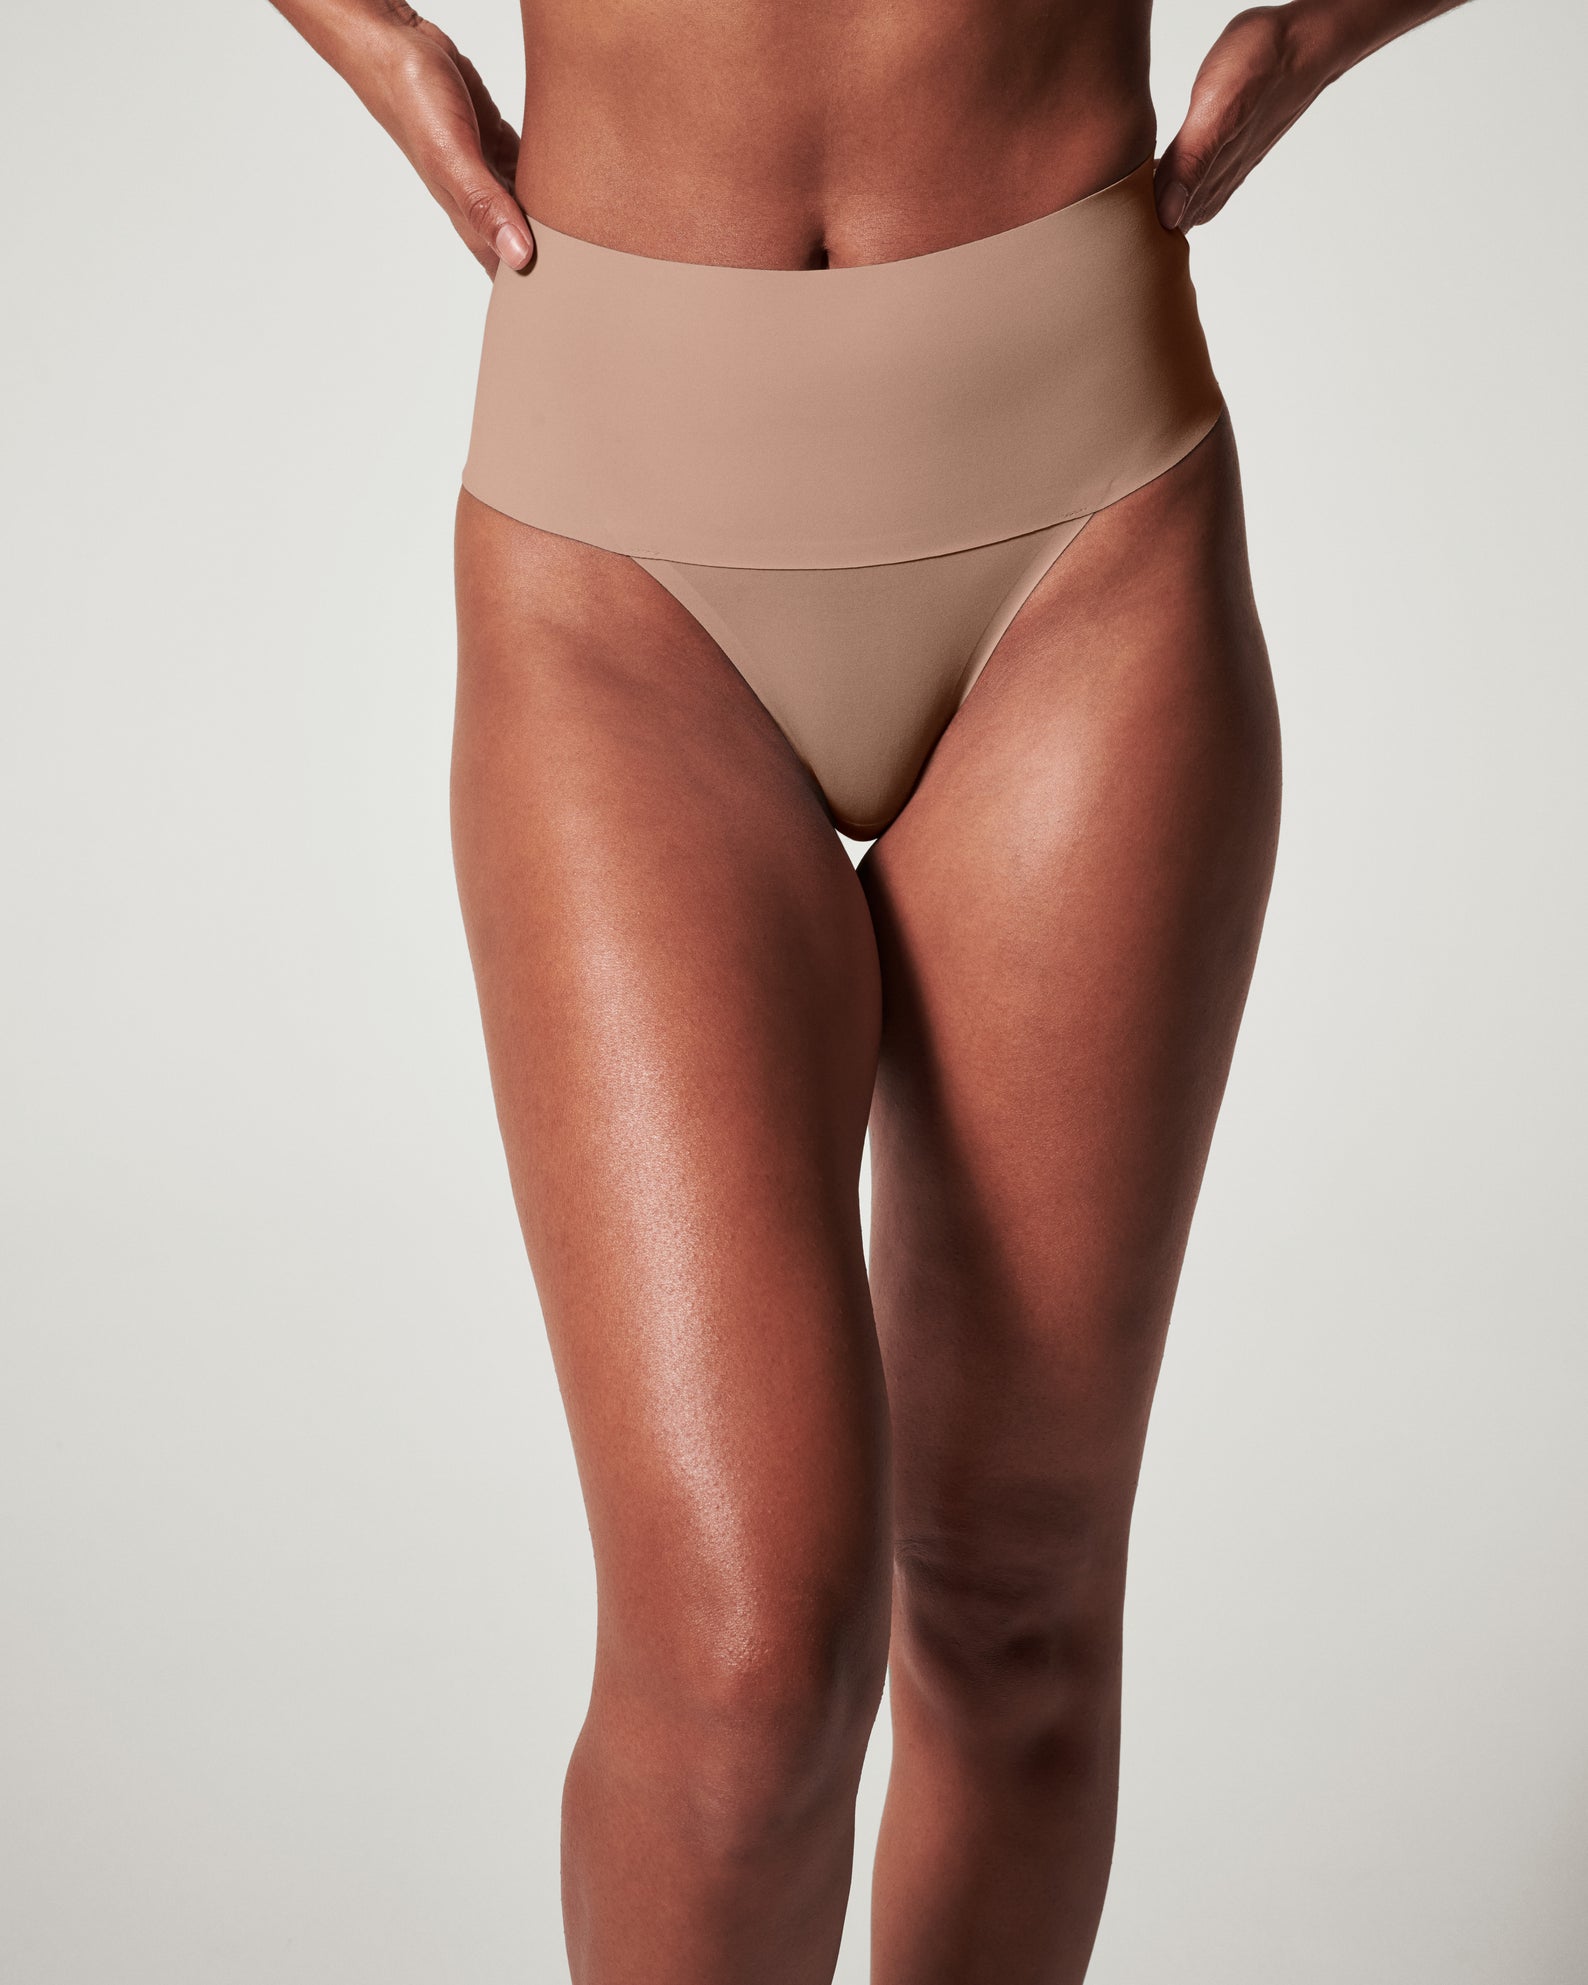 What are the must-have undergarments for women?, by Jessicaalbbert, Mar,  2024